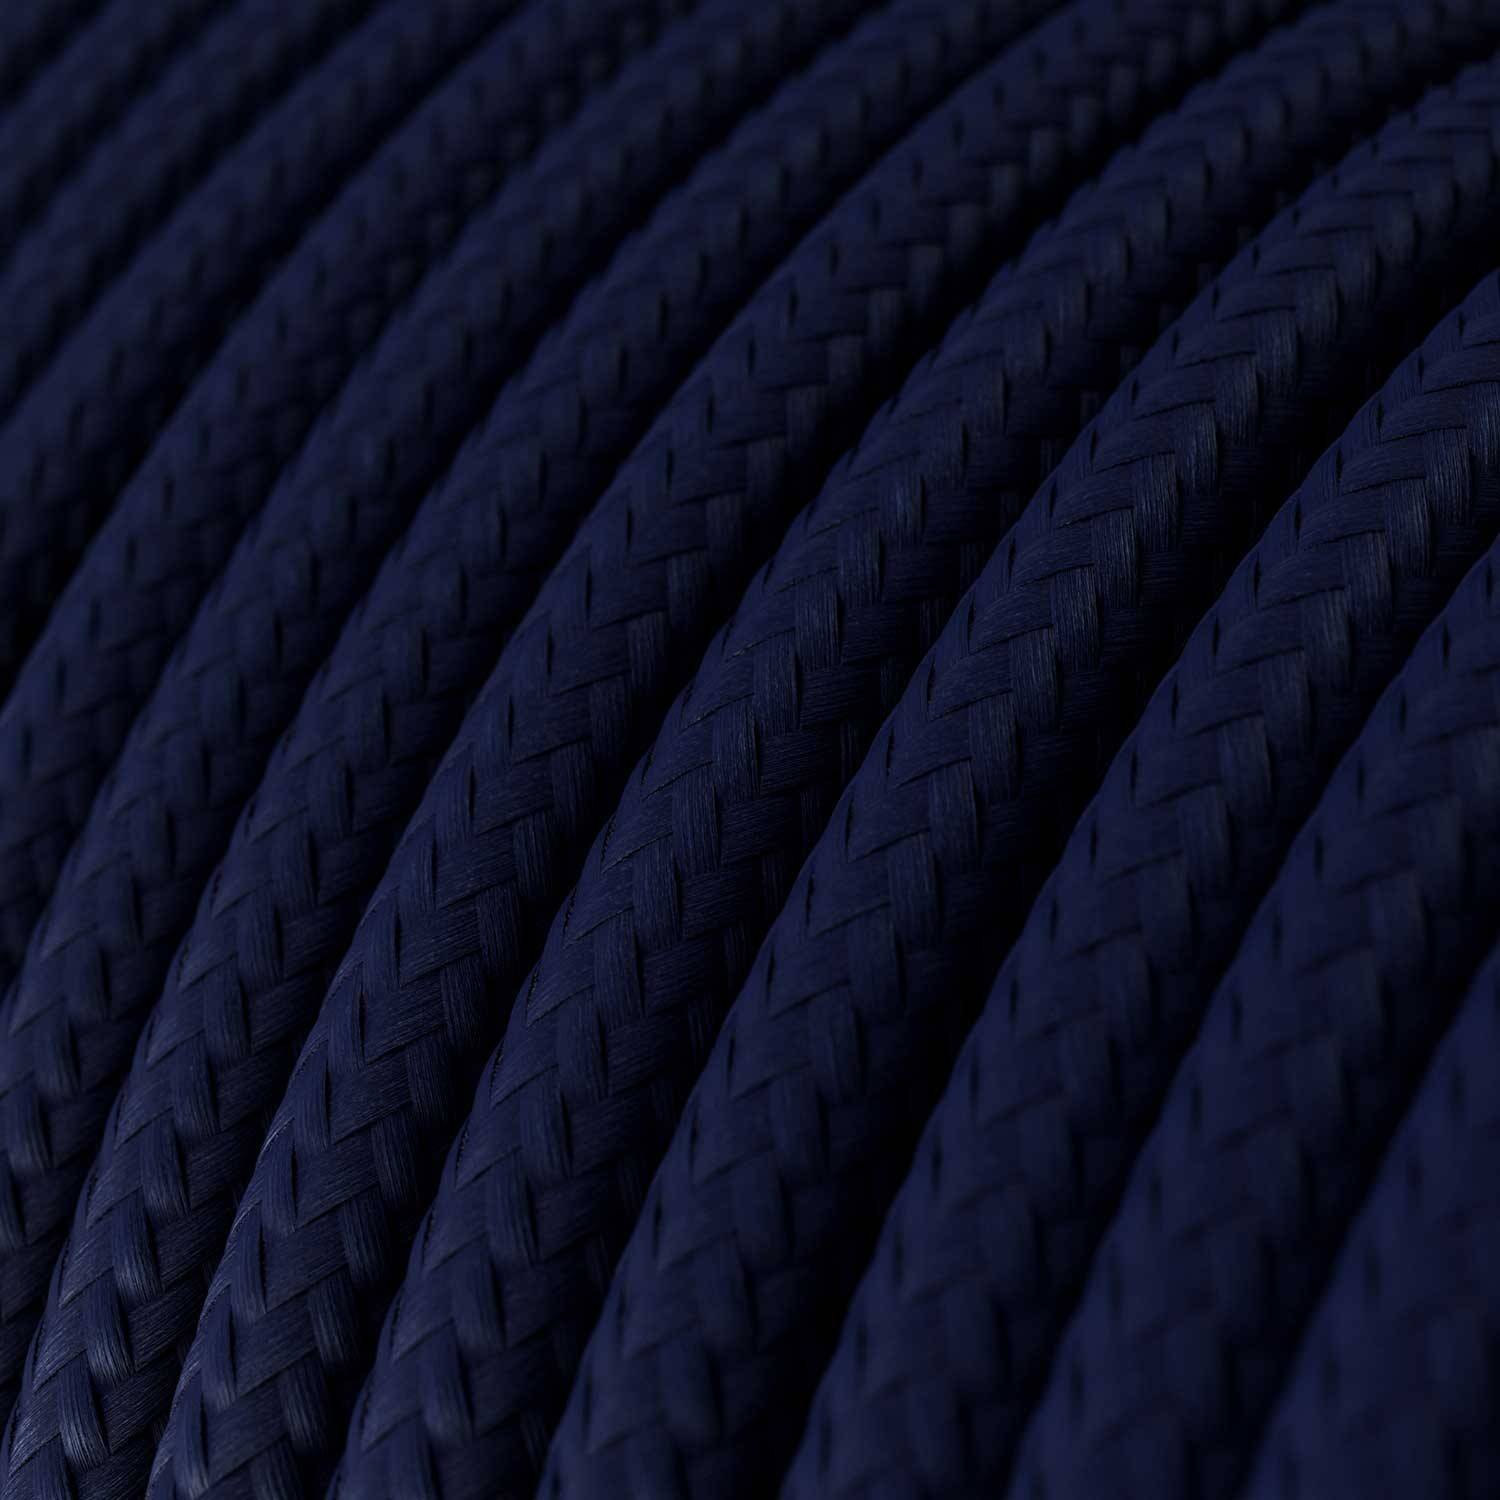 Glossy Deep Blue Textile Cable - The Original Creative-Cables - RM20 round 2x0.75mm / 3x0.75mm